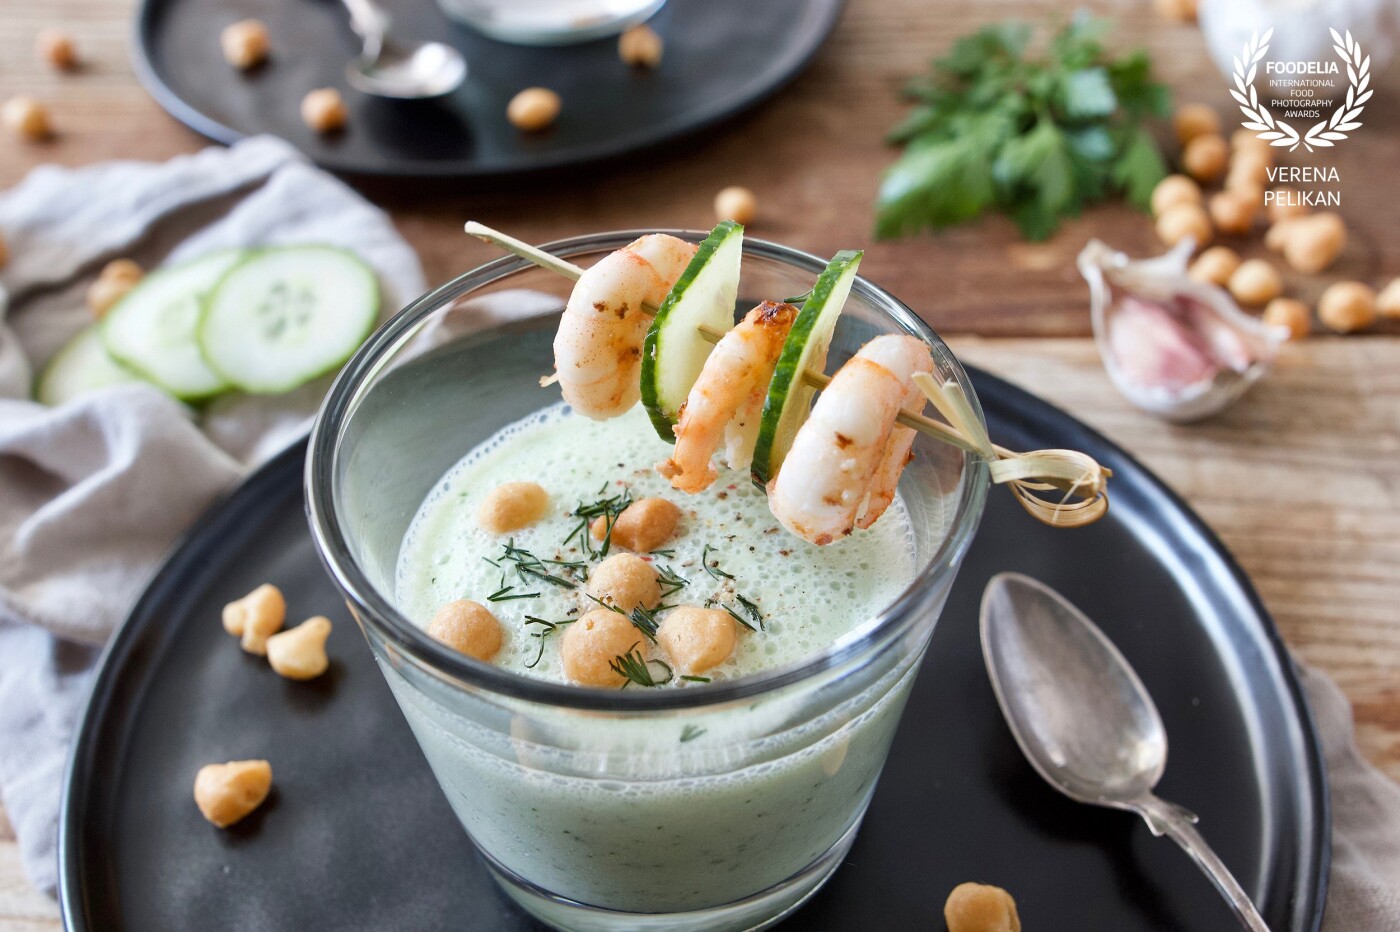 Chilled cucumber soup with buttermilk and yoghurt served with fried shrimps - a light and refreshing soup.<br />
Recipe can be found on my website: https://www.sweetsandlifestyle.com/rezept/kalte-gurkensuppe-mit-backerbsen/